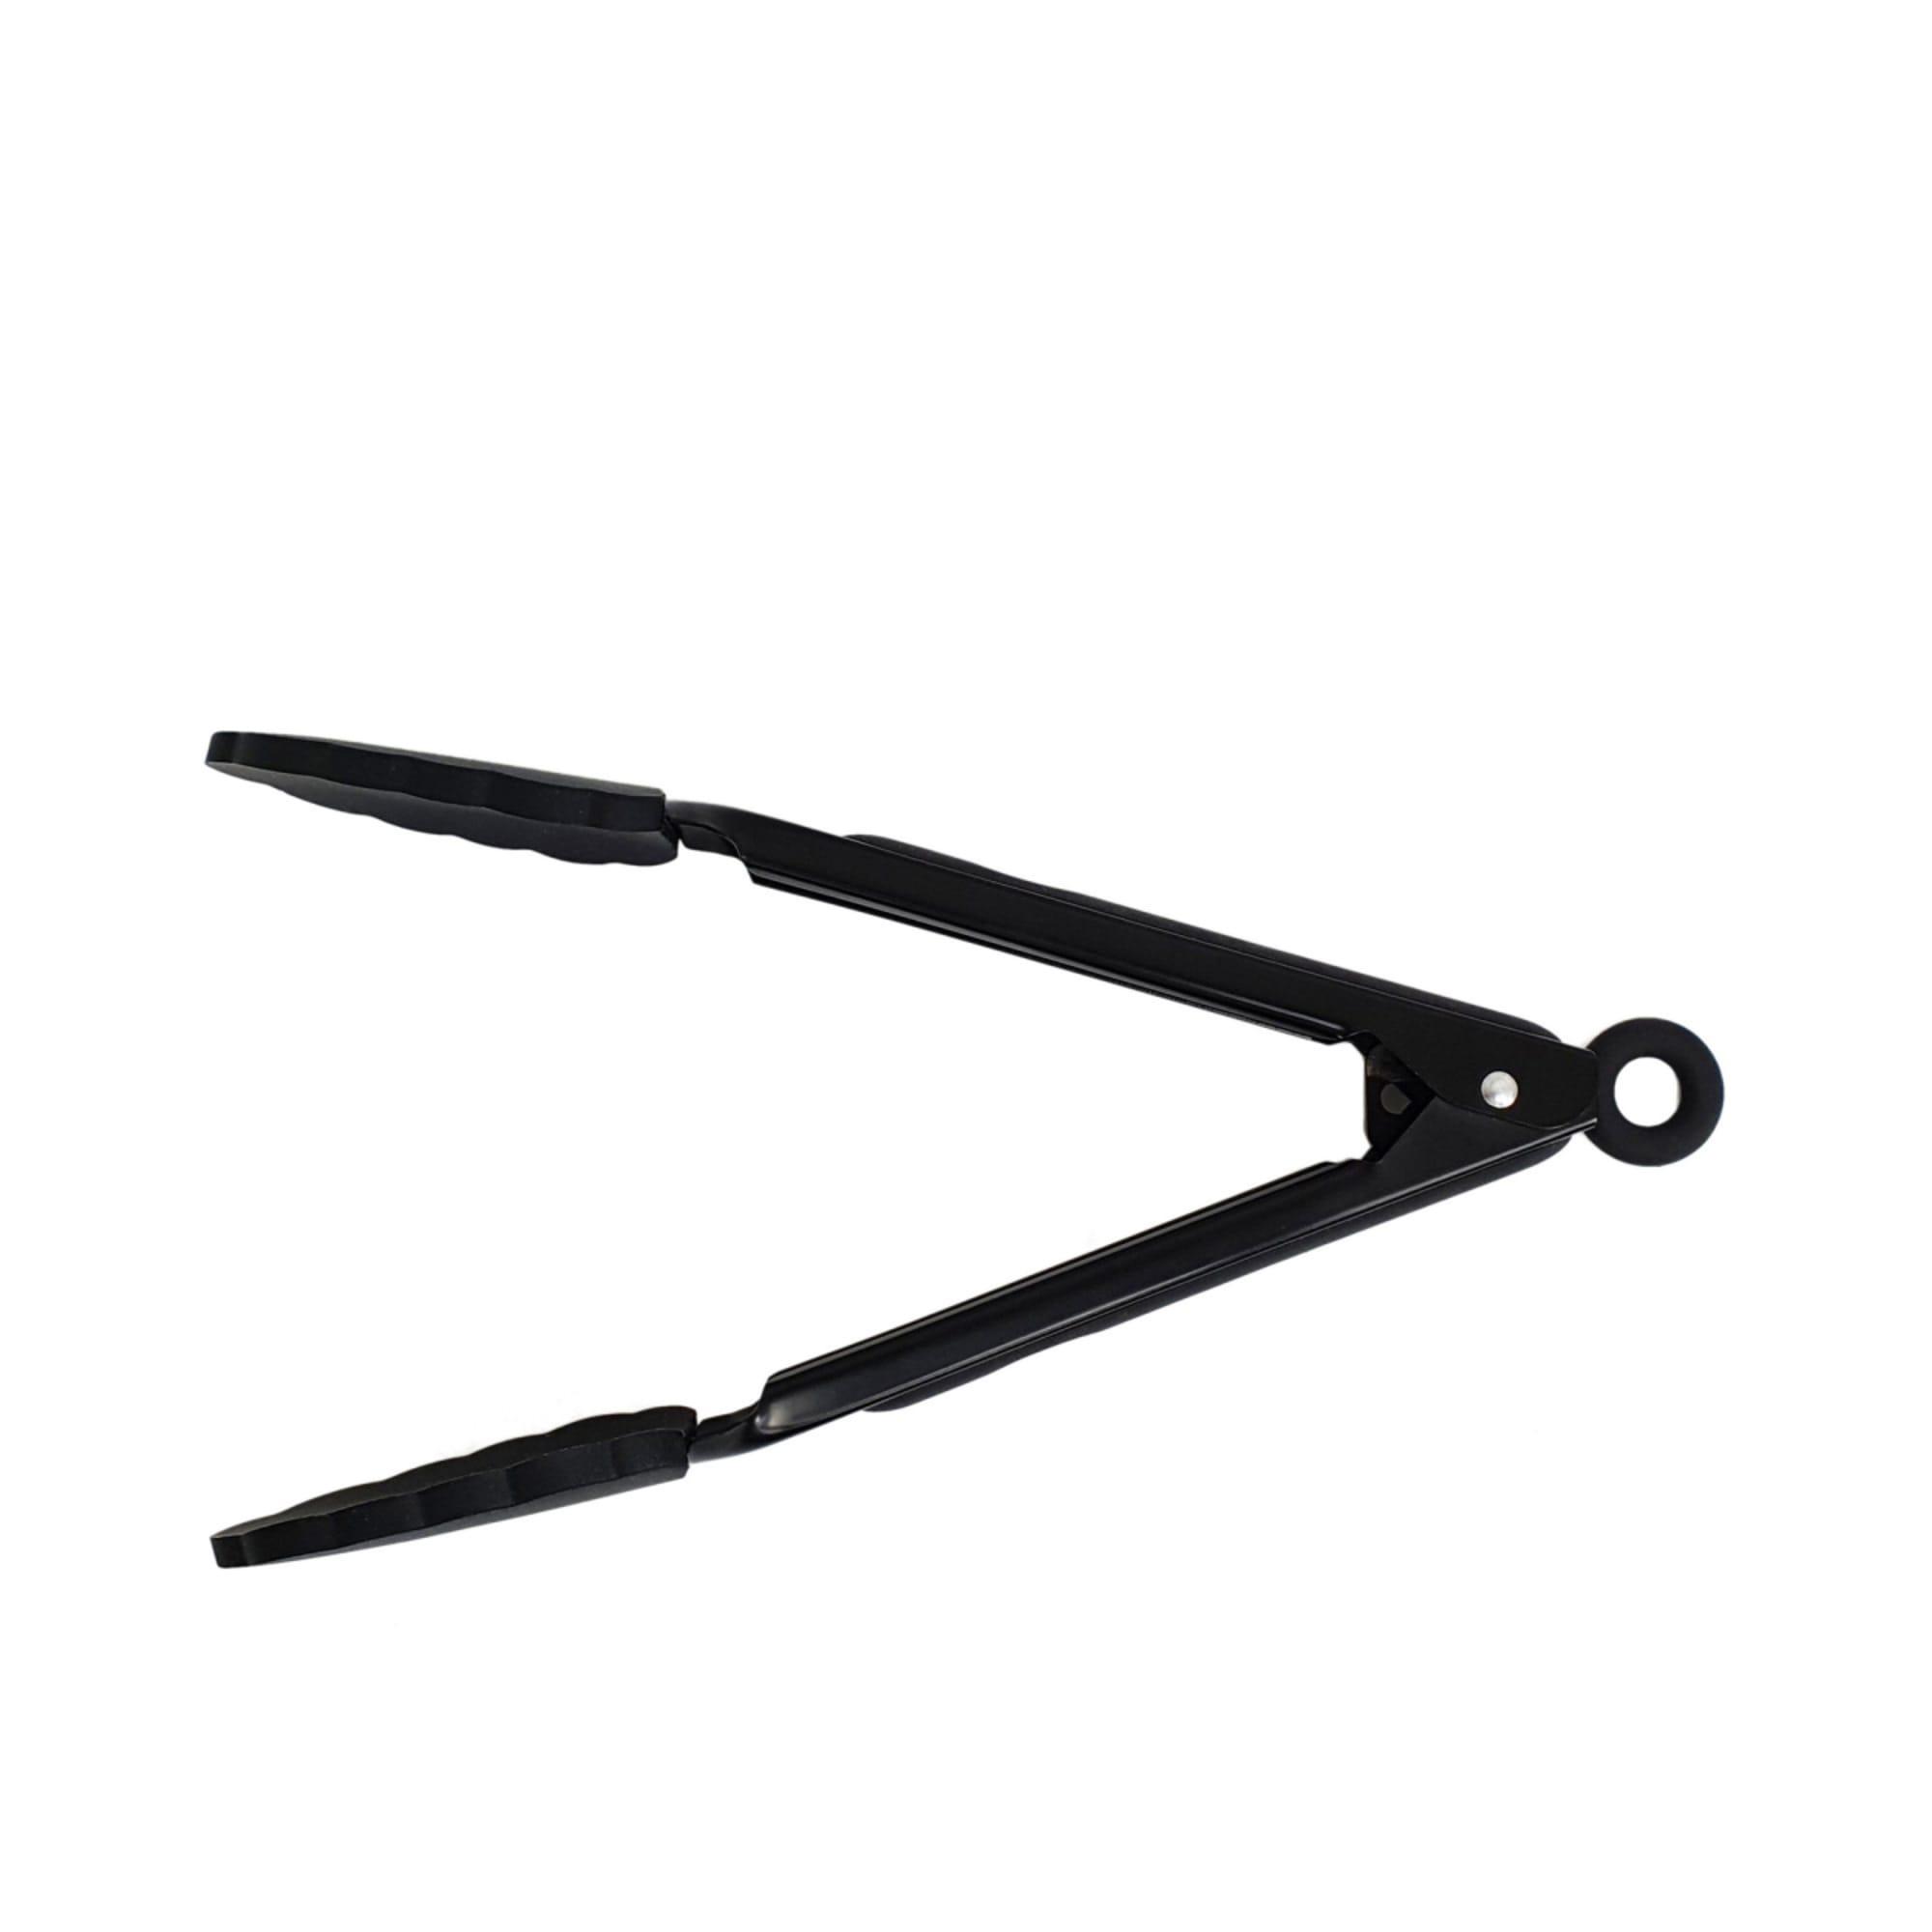 St. Clare Heavy Duty Tongs with Silicone Grip 26cm Black Image 3